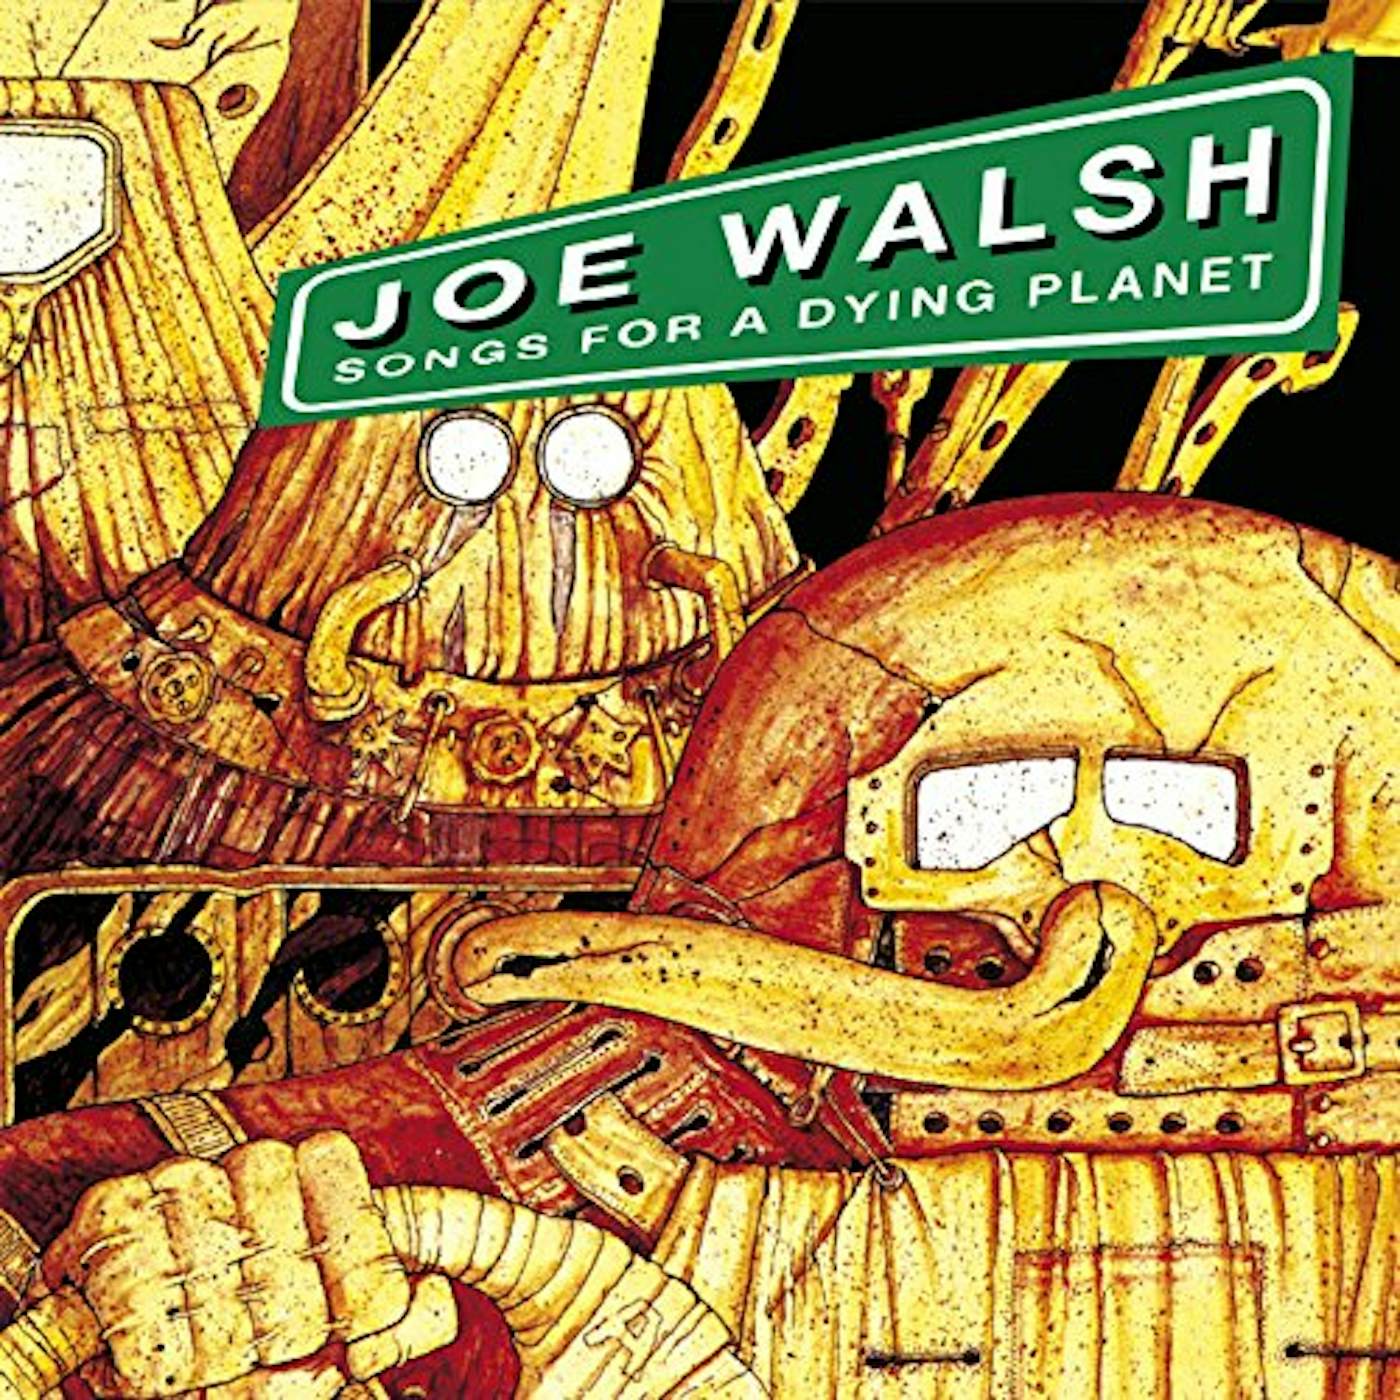 Joe Walsh SONGS FOR A DYING PLANET CD